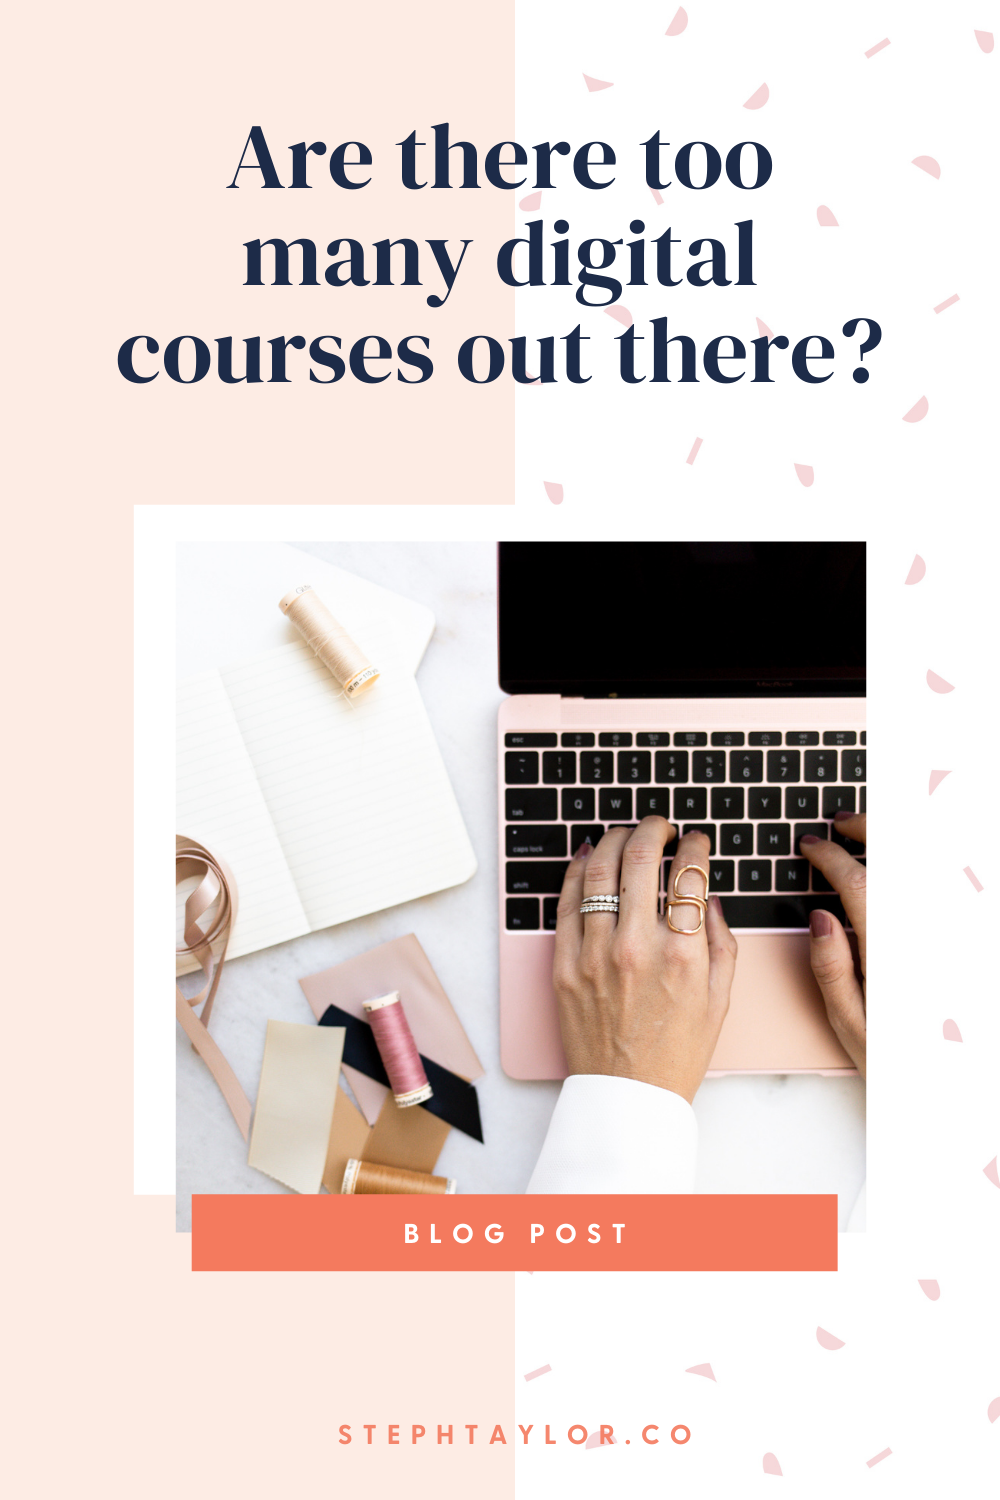 Are there too many digital courses